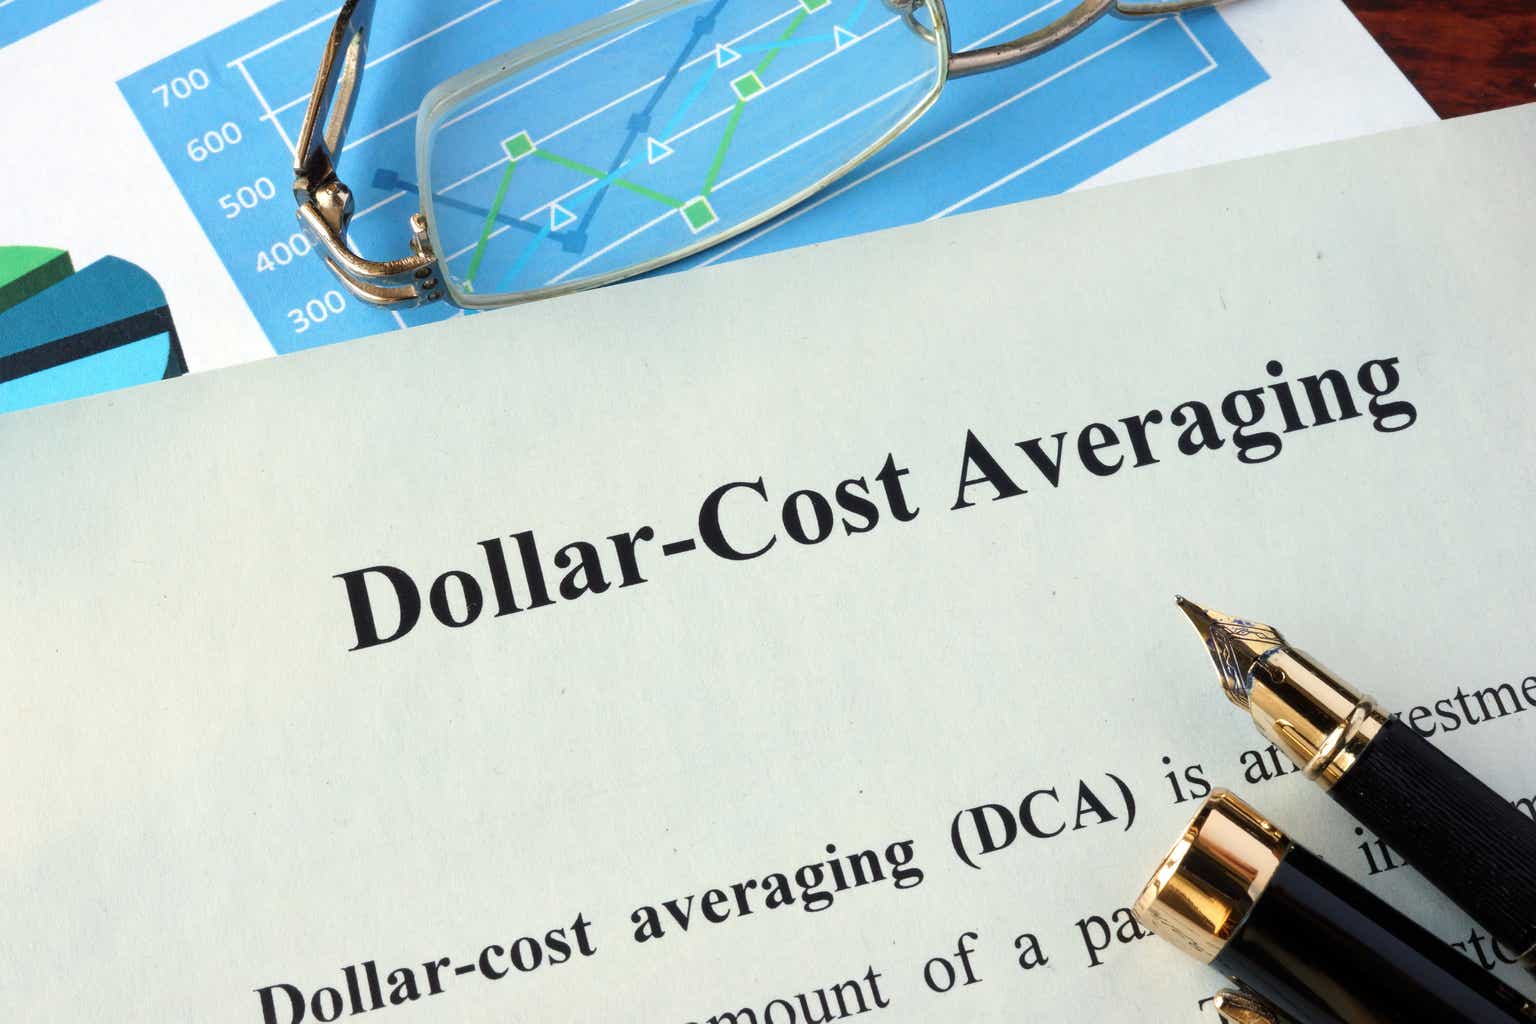 Dollar-cost averaging (DCA) on a paper and charts.